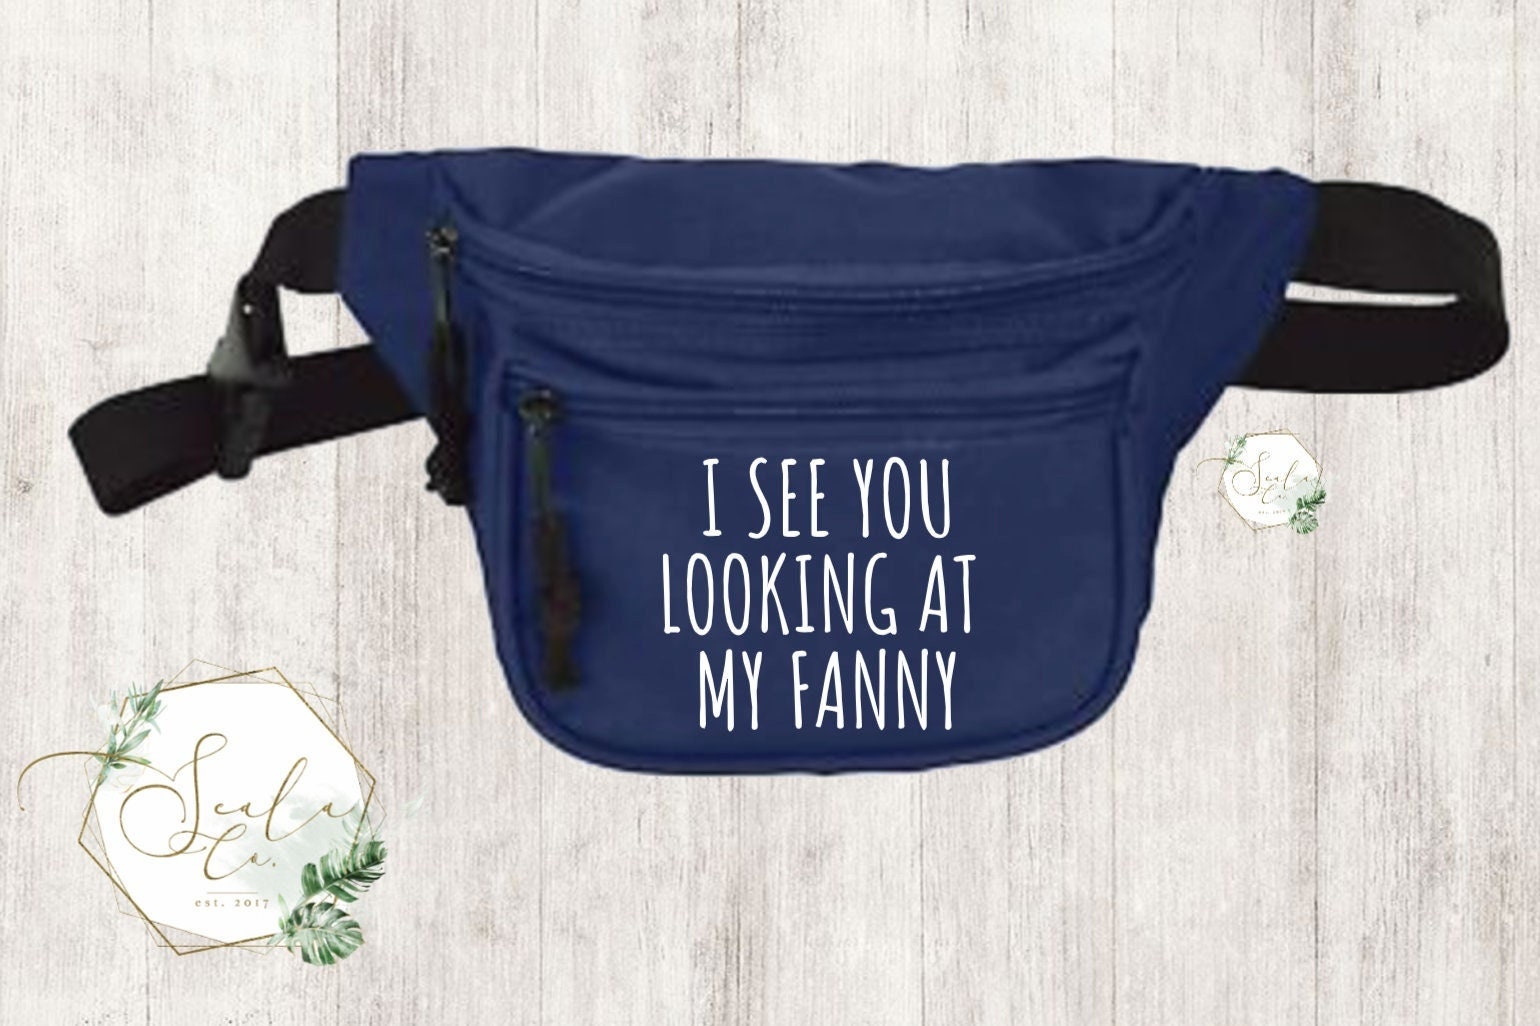 I Fuxx With Fanny Packs - Funny Dank Meme Fanny Pack Pullover Hoodie